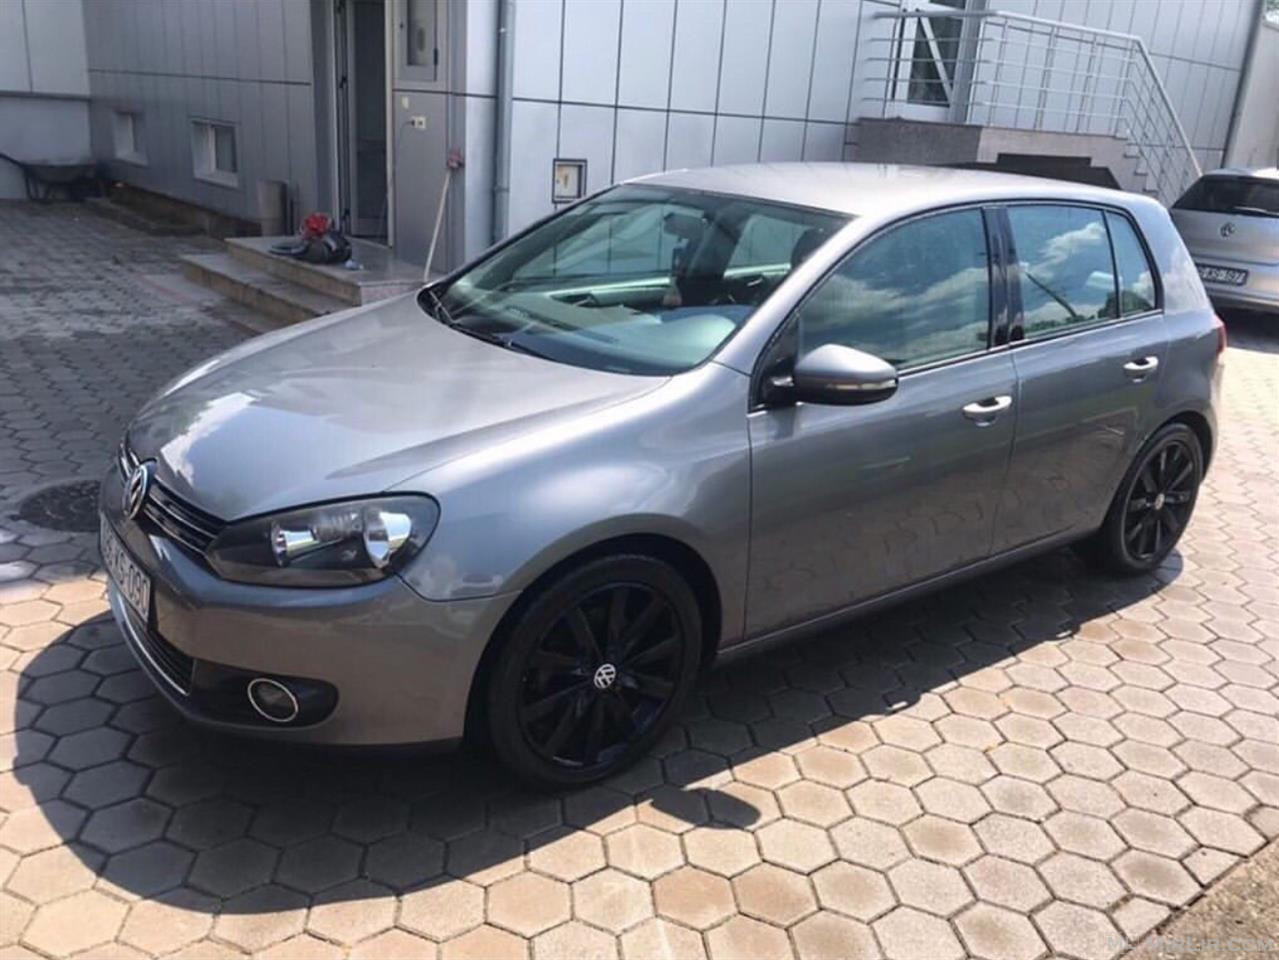 Shes golf 6 